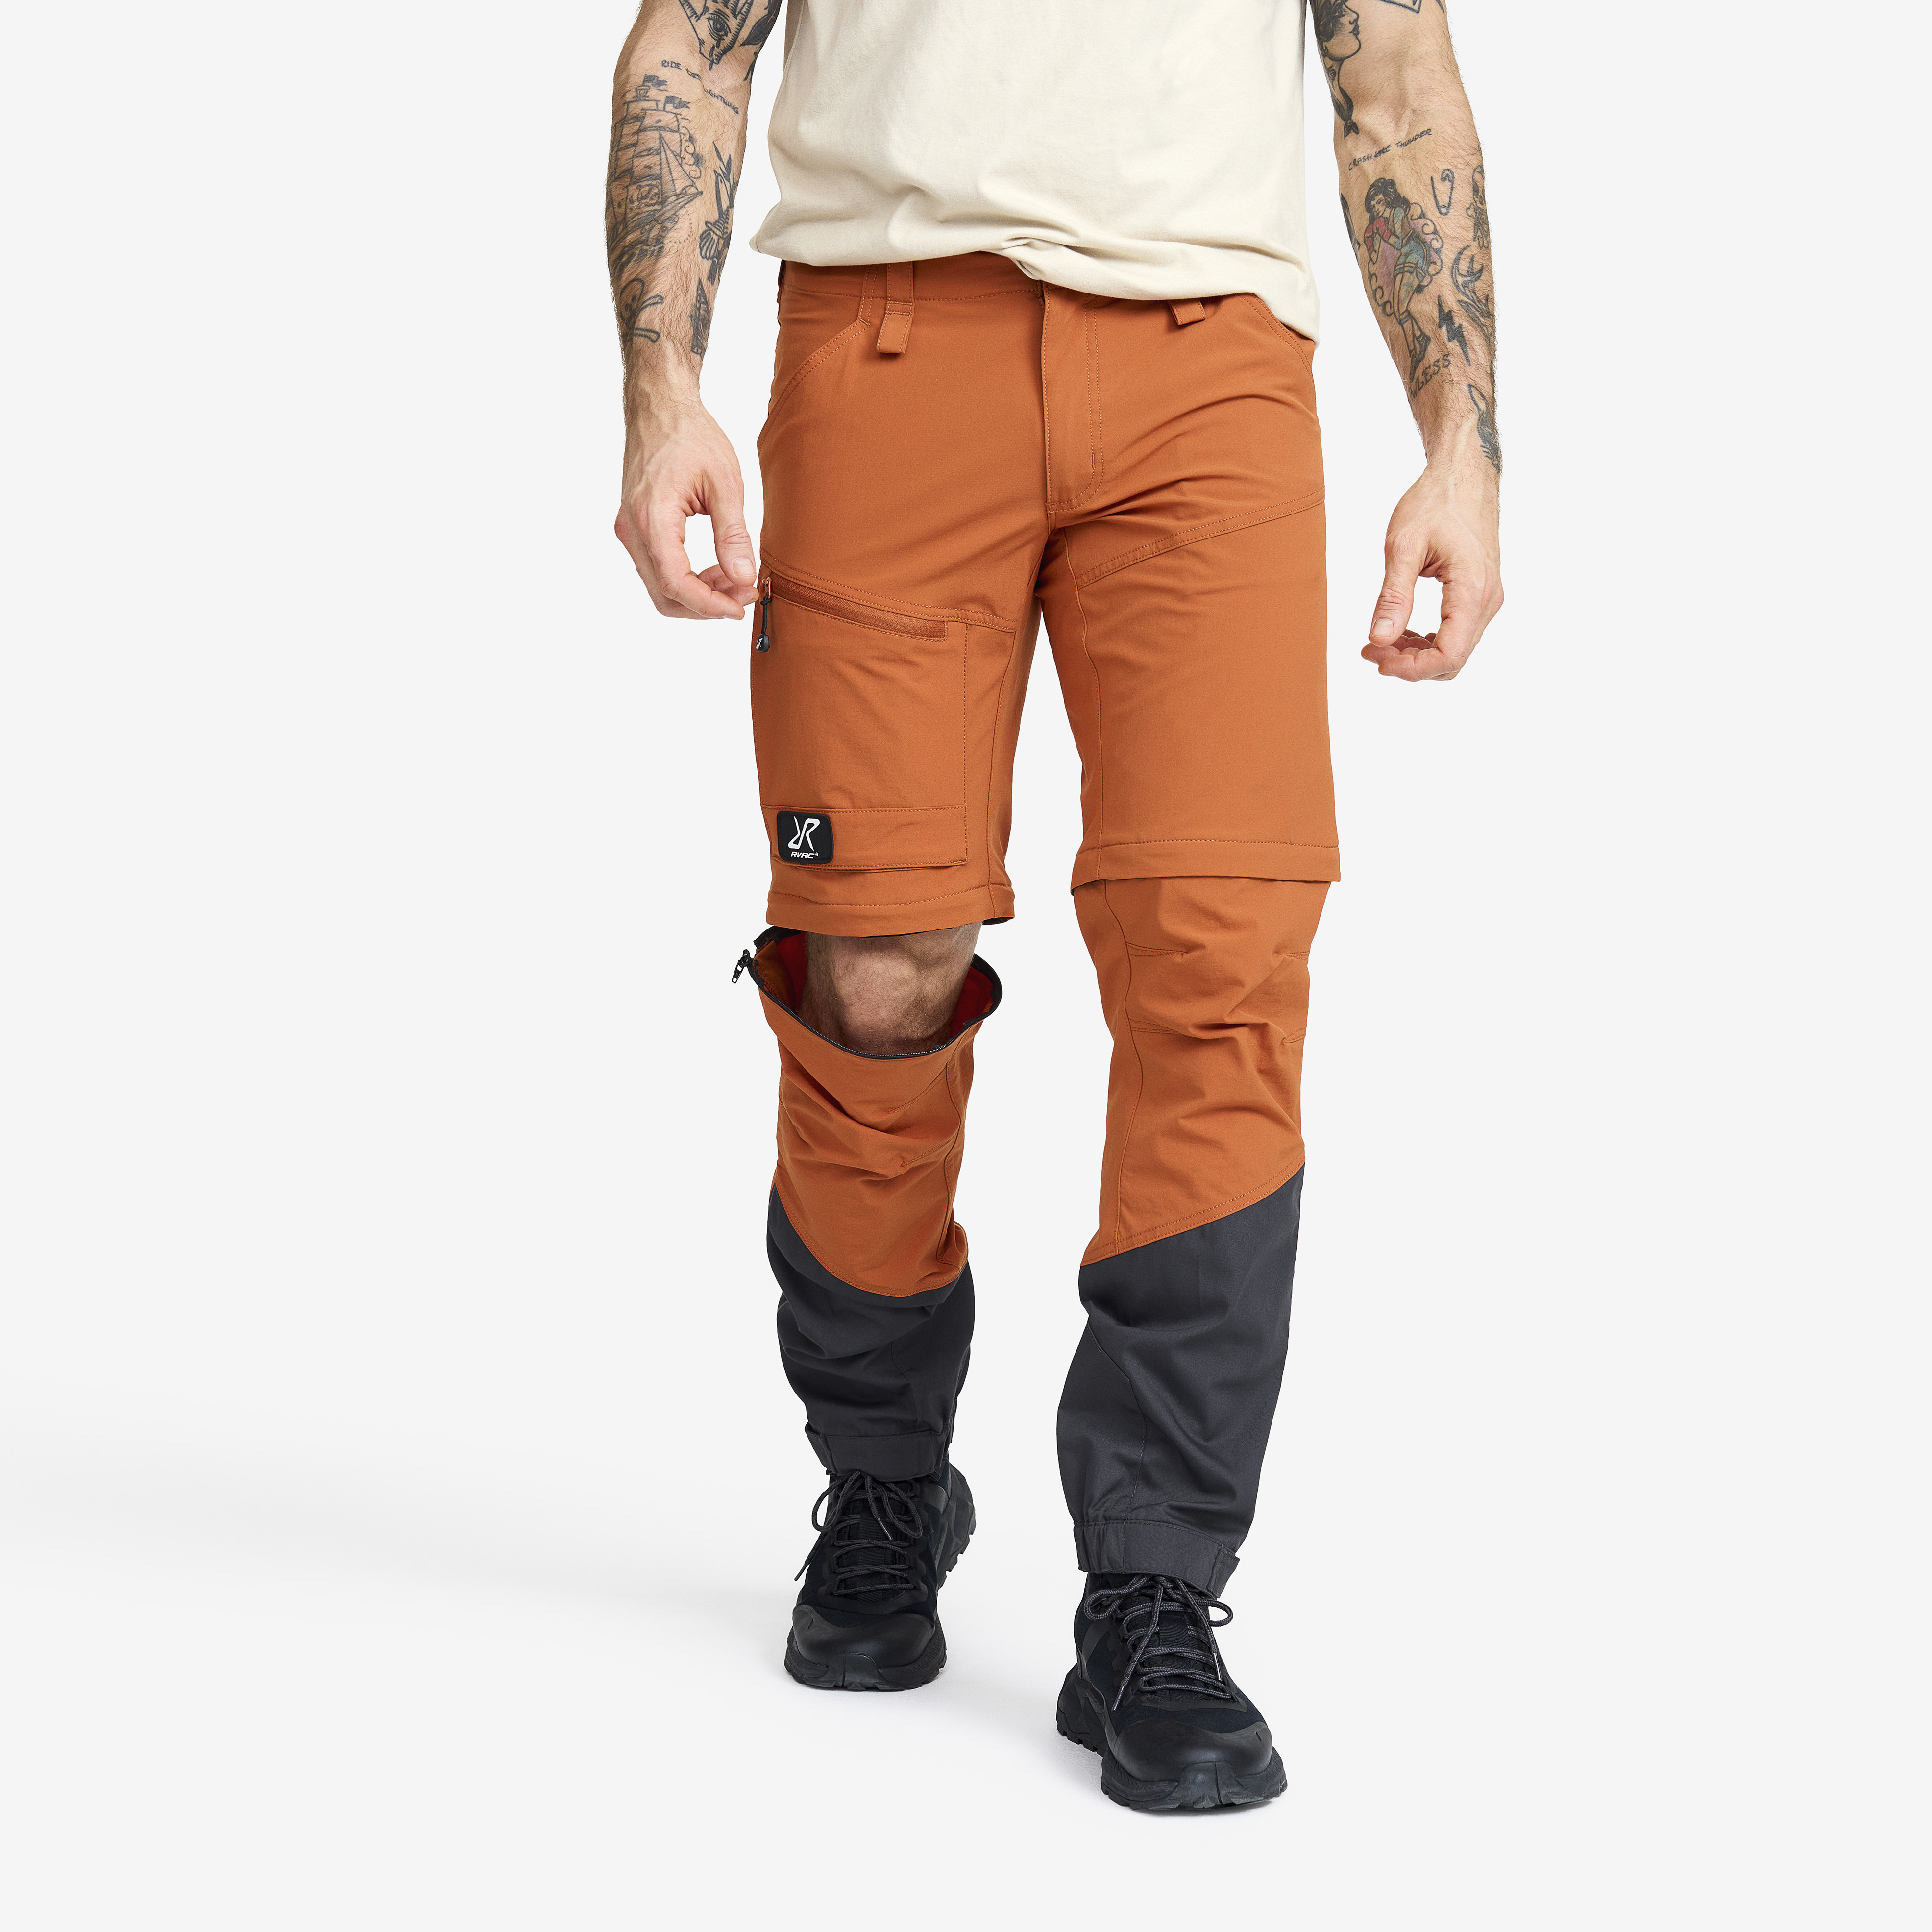 Range Pro Zip-off Trousers Teracotta Brown/Anthracite Men